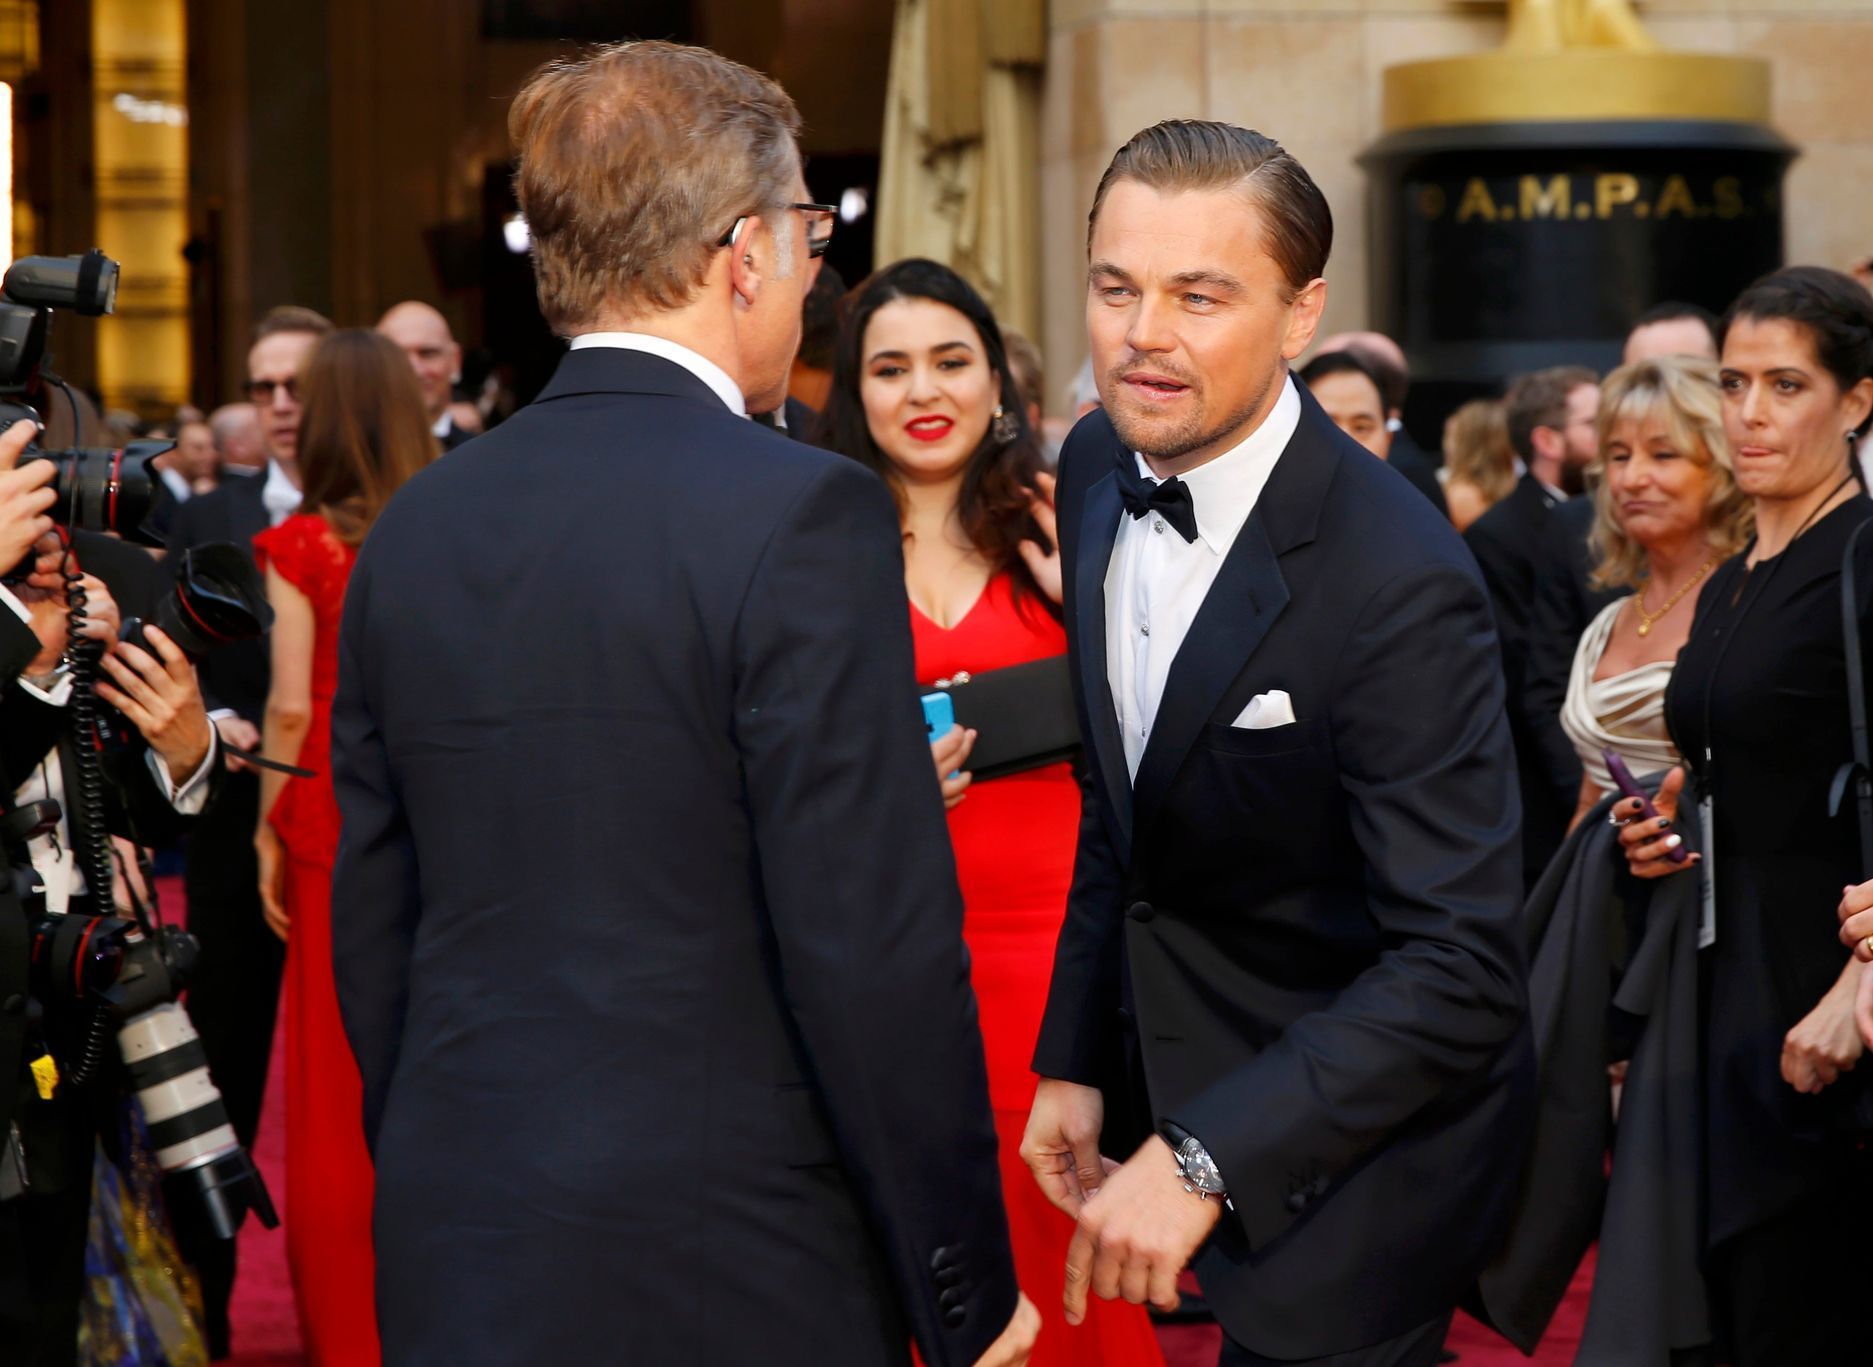 Leonardo DiCaprio greets actor Christoph Waltz on the red carpet at the 86th Academy Awards in Hollywood